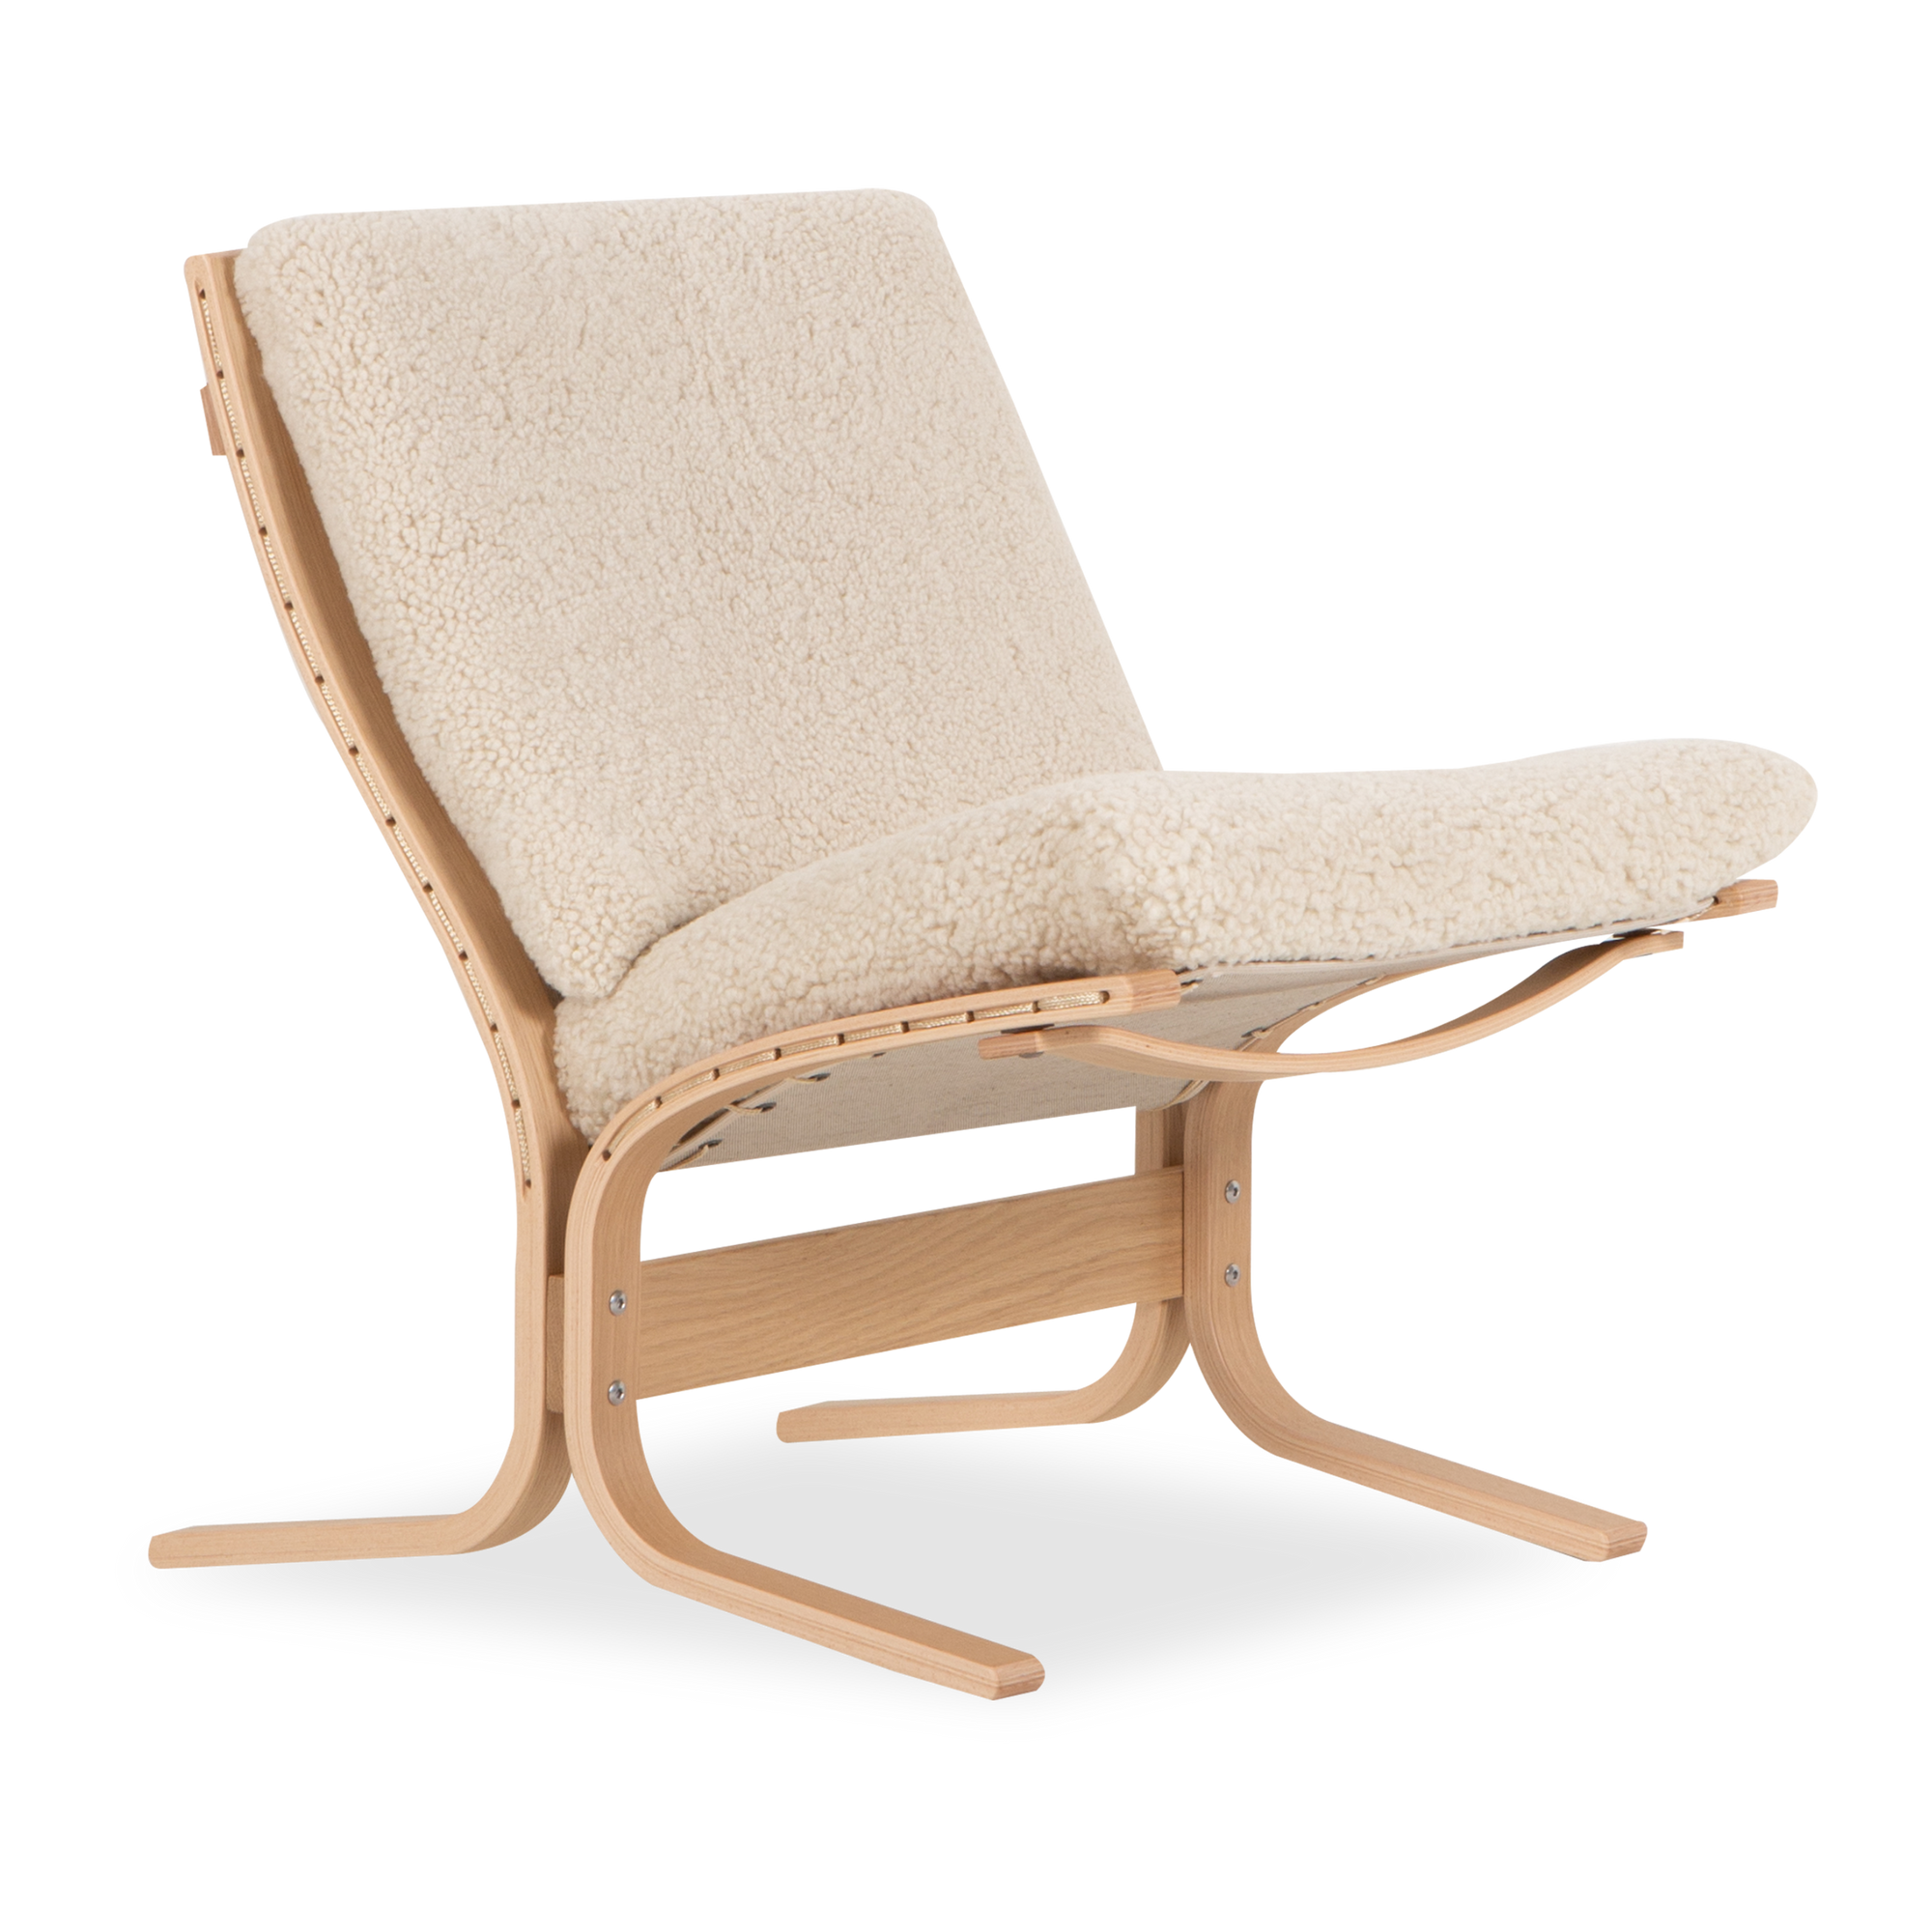 An iconic design by Norwegian designer Ingmar Relling, the Siesta Ovis Low Lounge Chair delivers a eye-catching silhouette and lightweight feel.